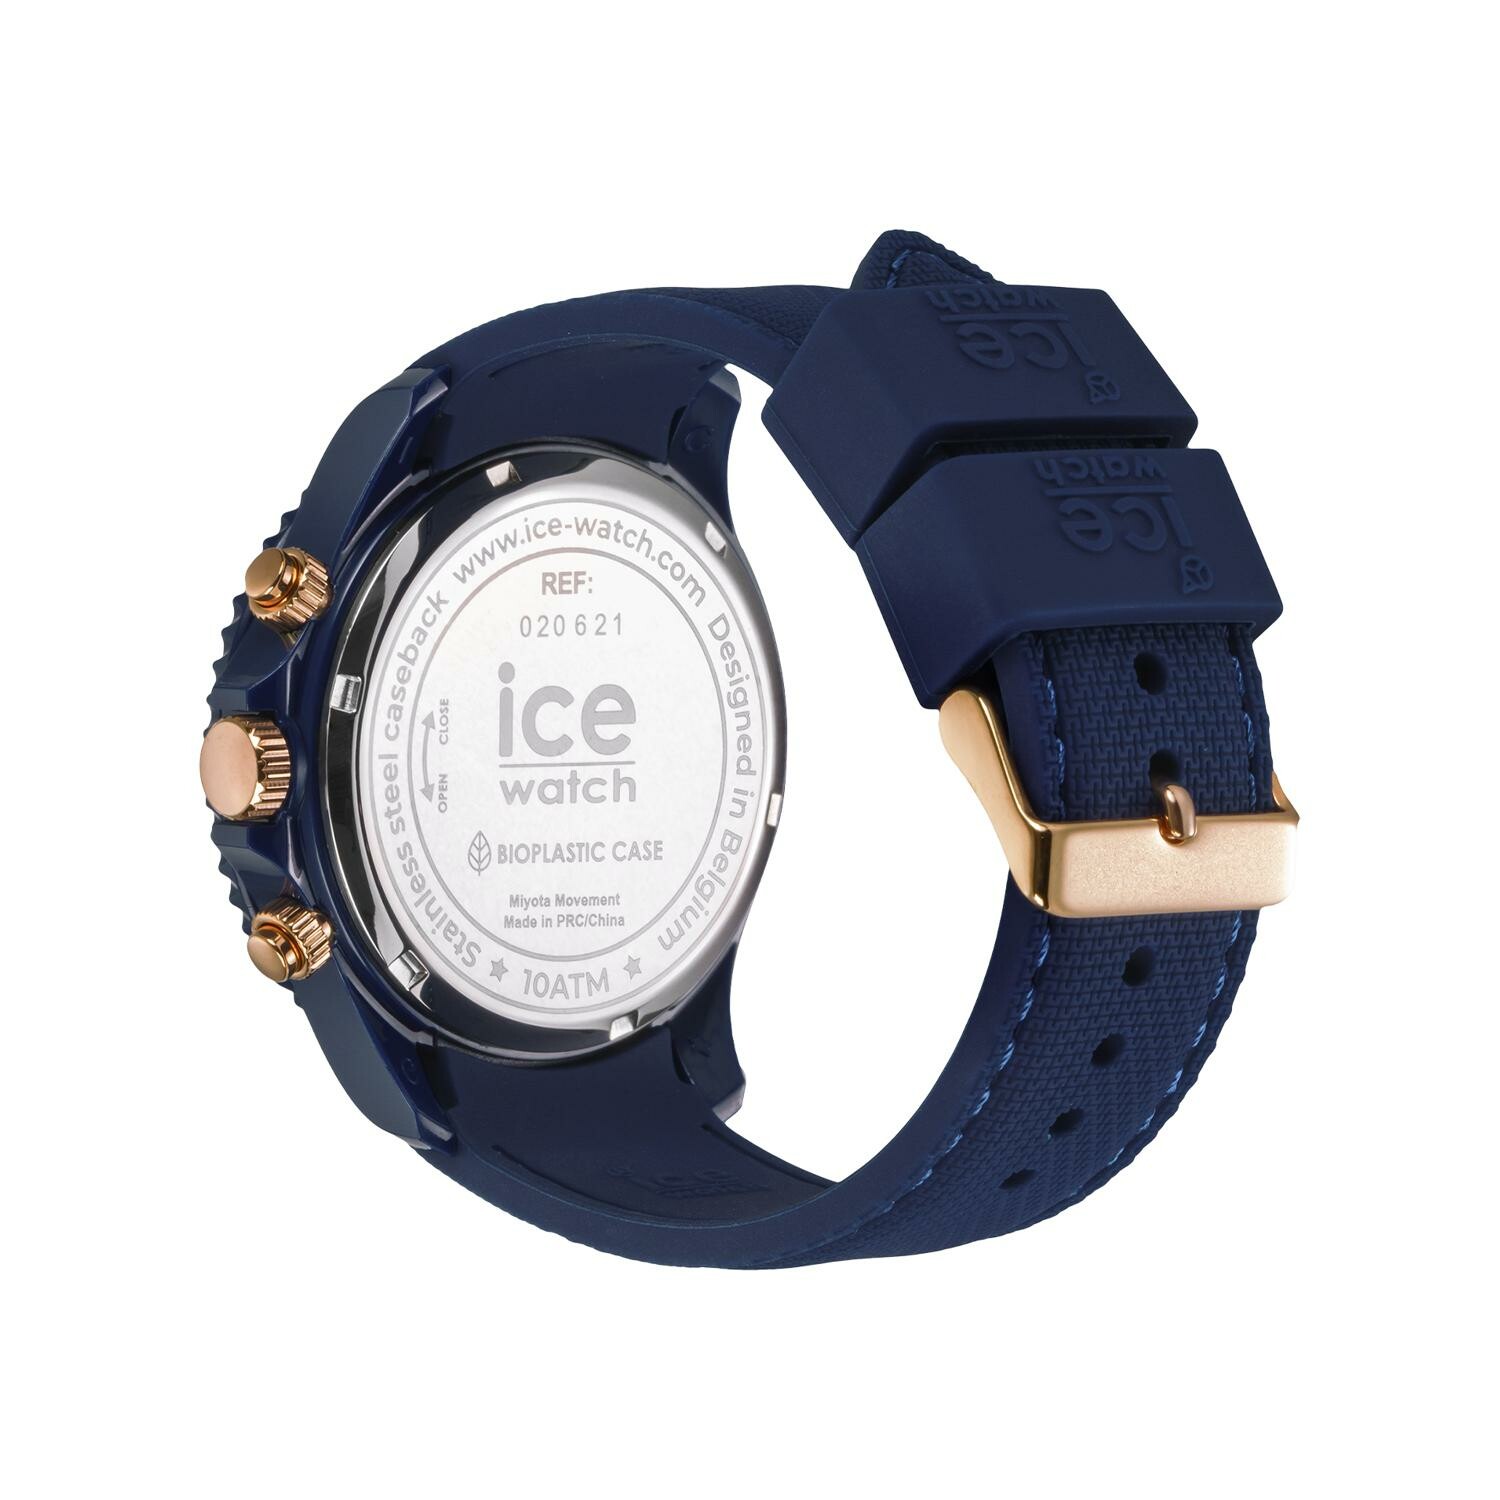 Montre Ice Achat ICE rose-gold Watch chrono Blue